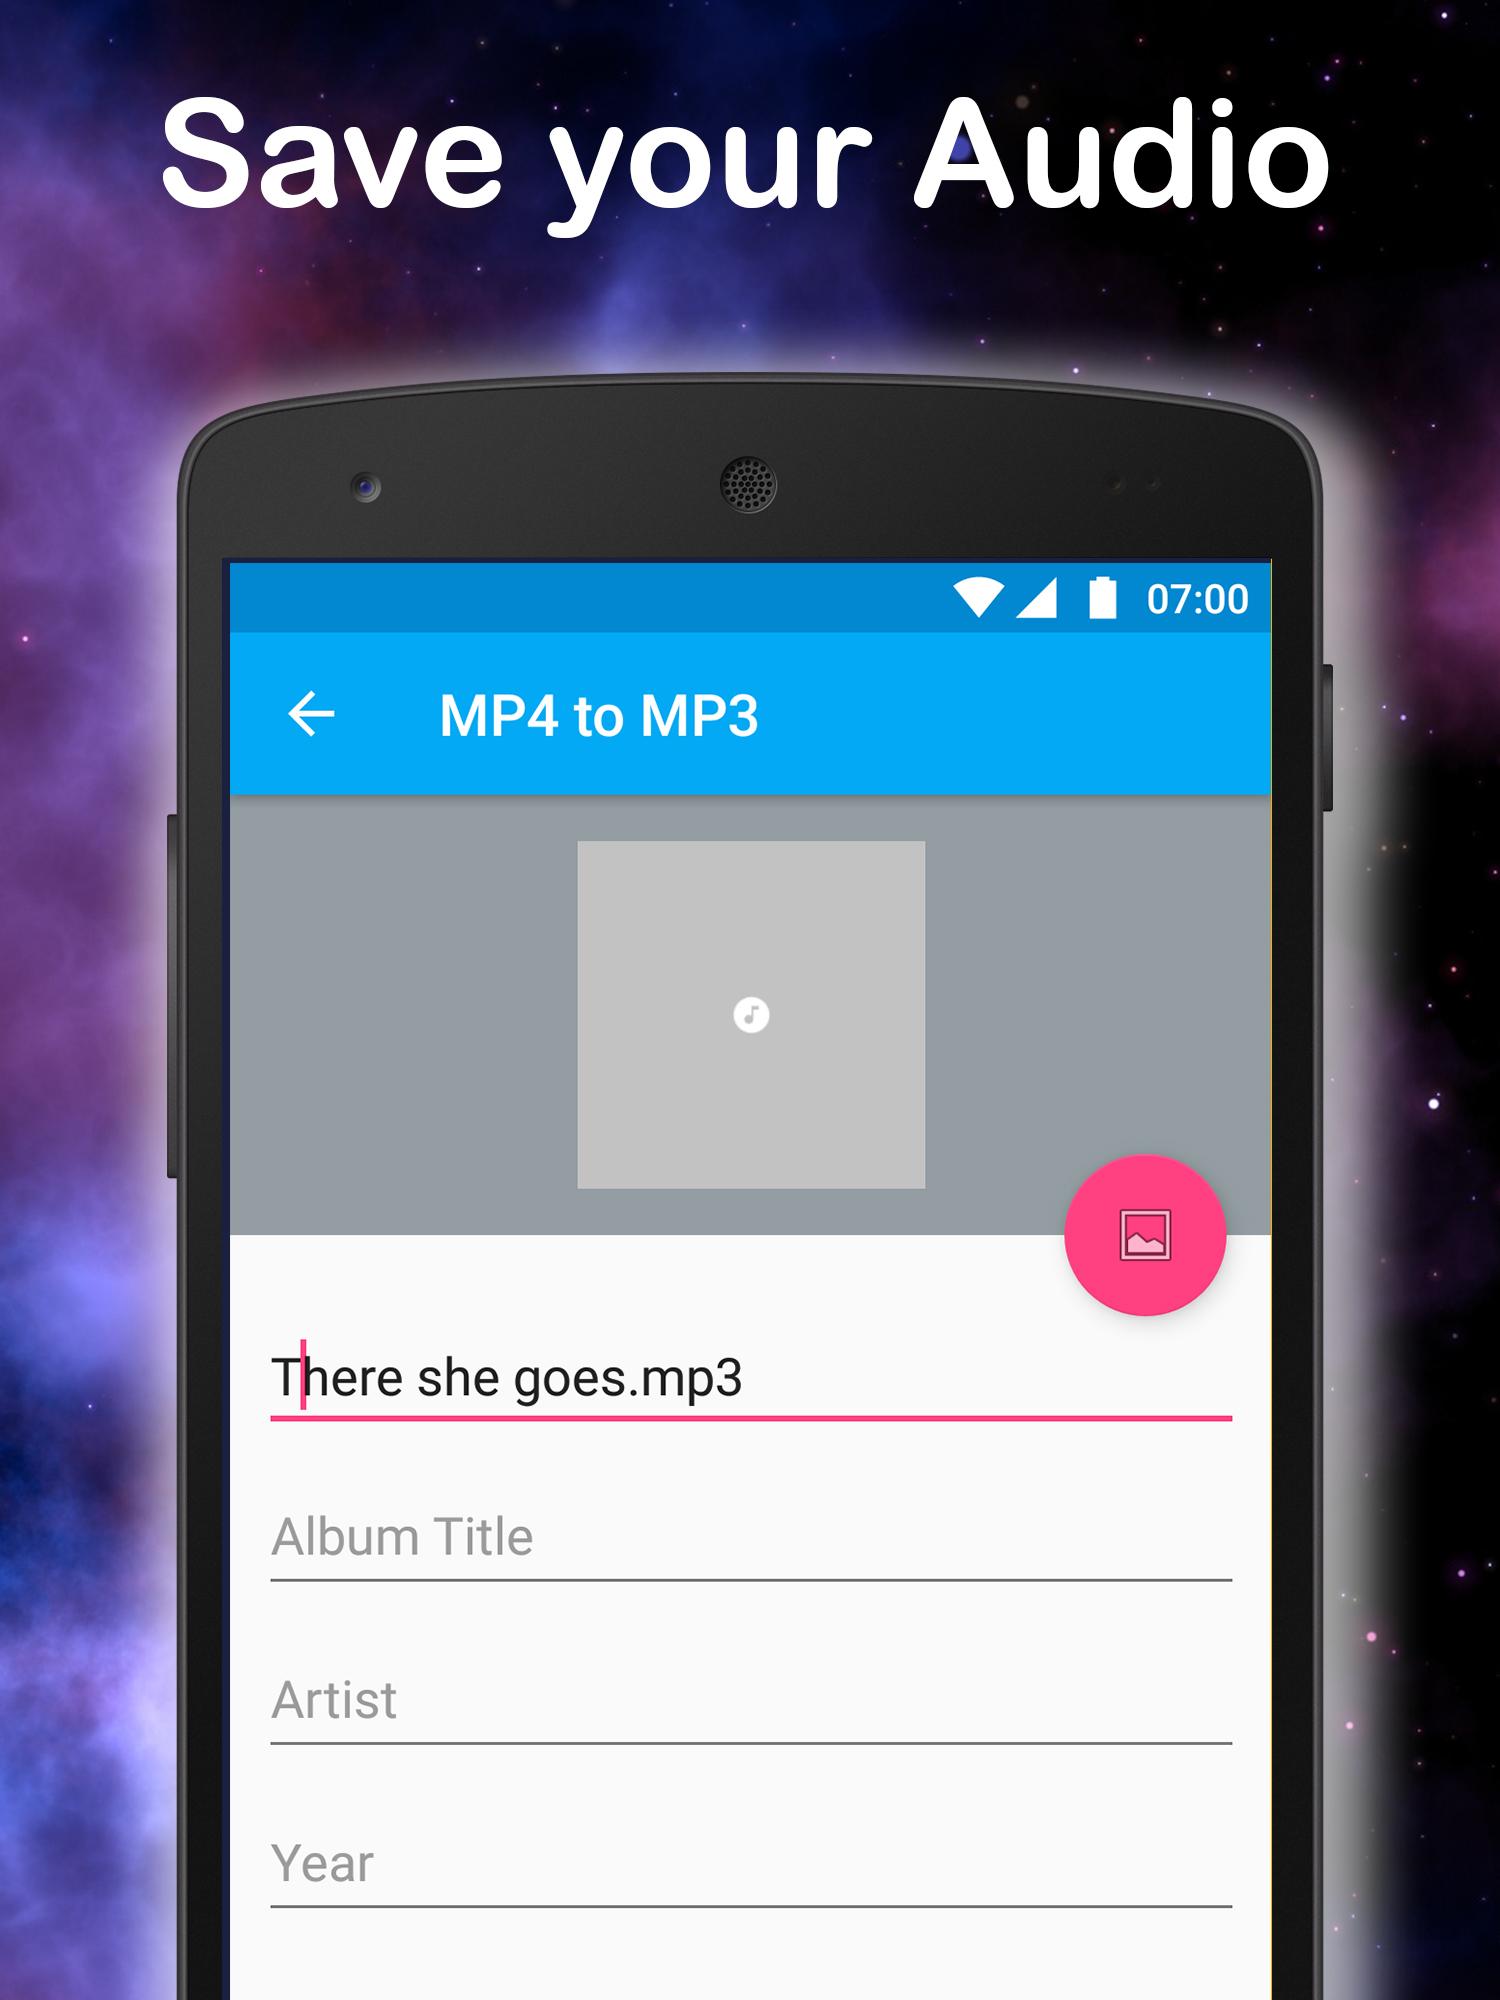 Mp4 to Mp3 converter for Android - APK Download - 